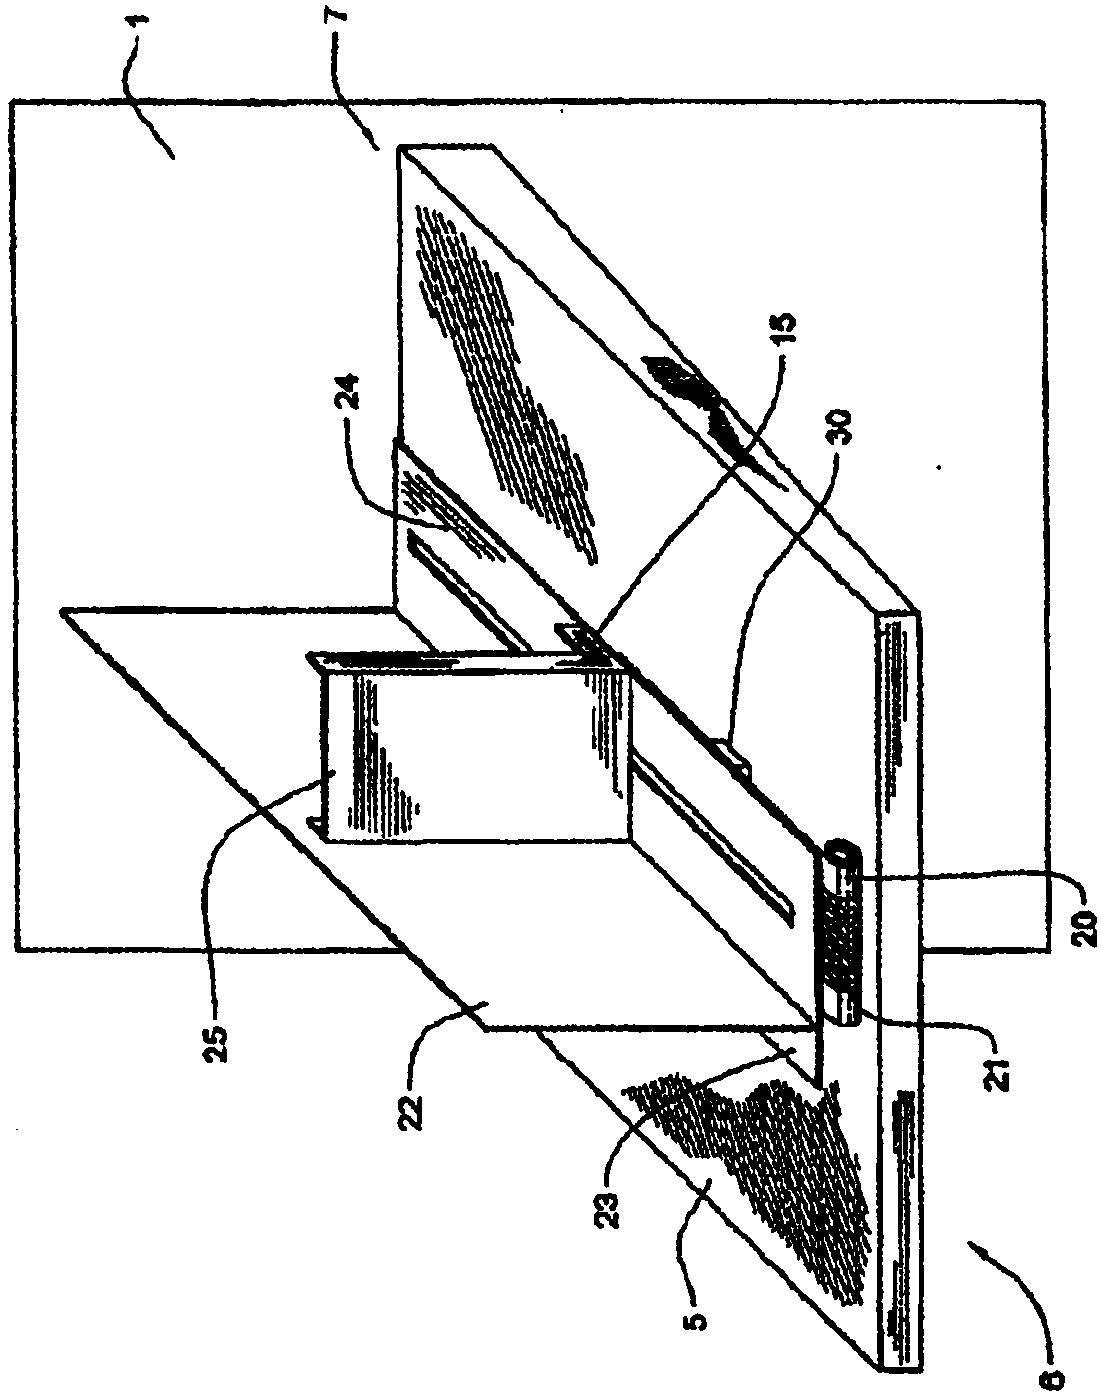 Systems and methods for merchandizing electronic displays